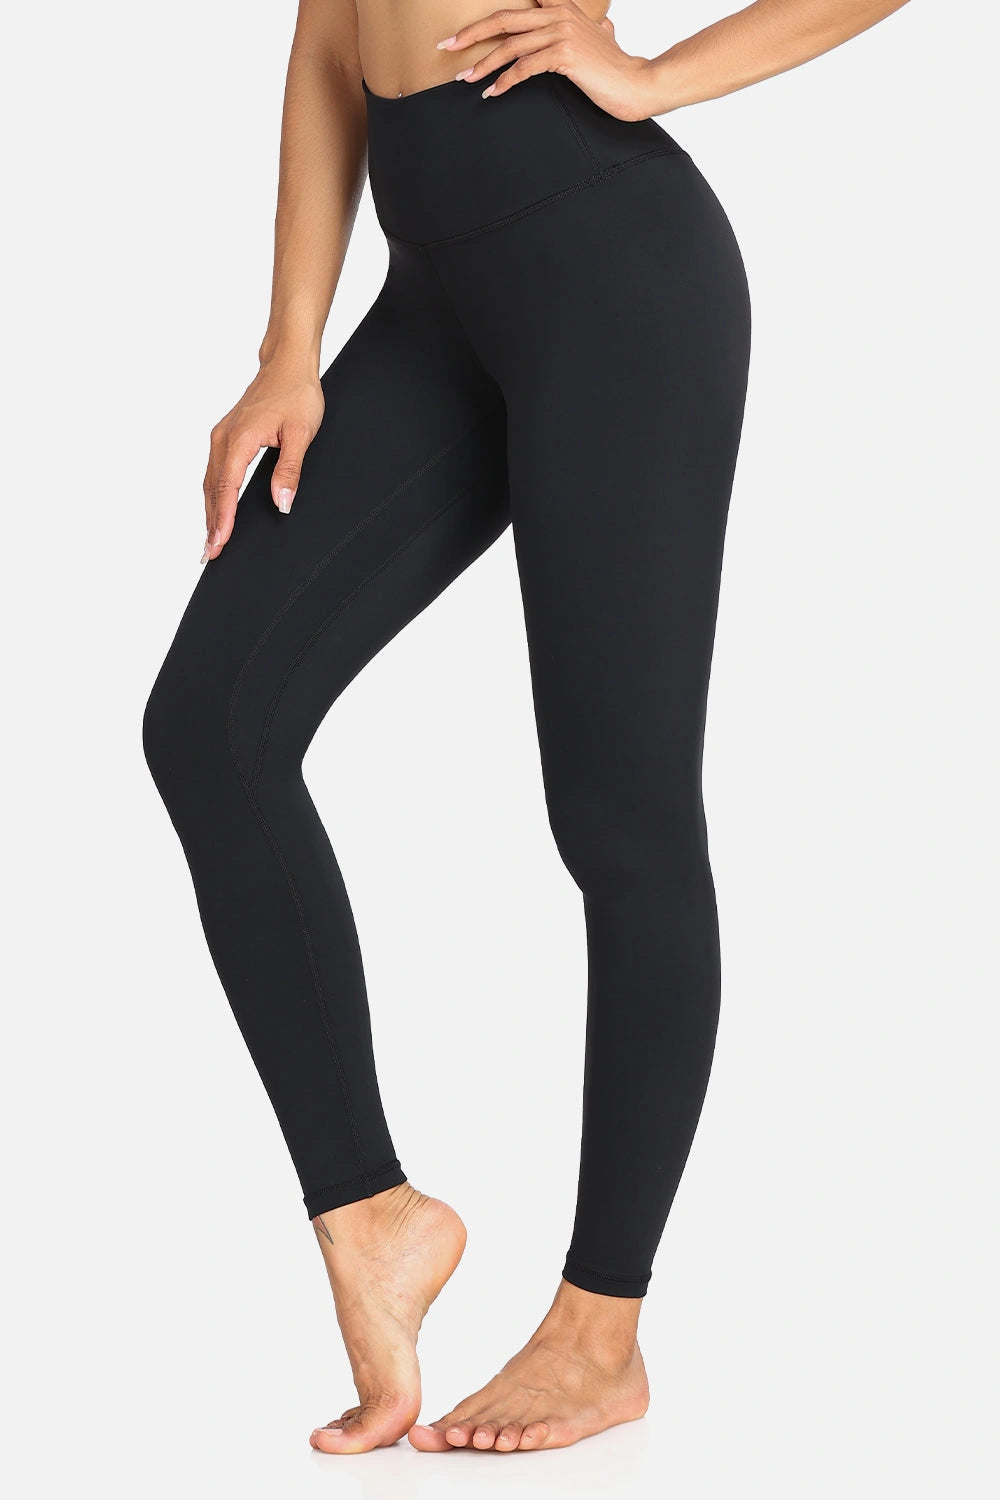 Women's High Waisted Full-Length Leggings with Pockets - Buttery Soft,  Moisture-Wicking Pocketed Workout Yoga Pants